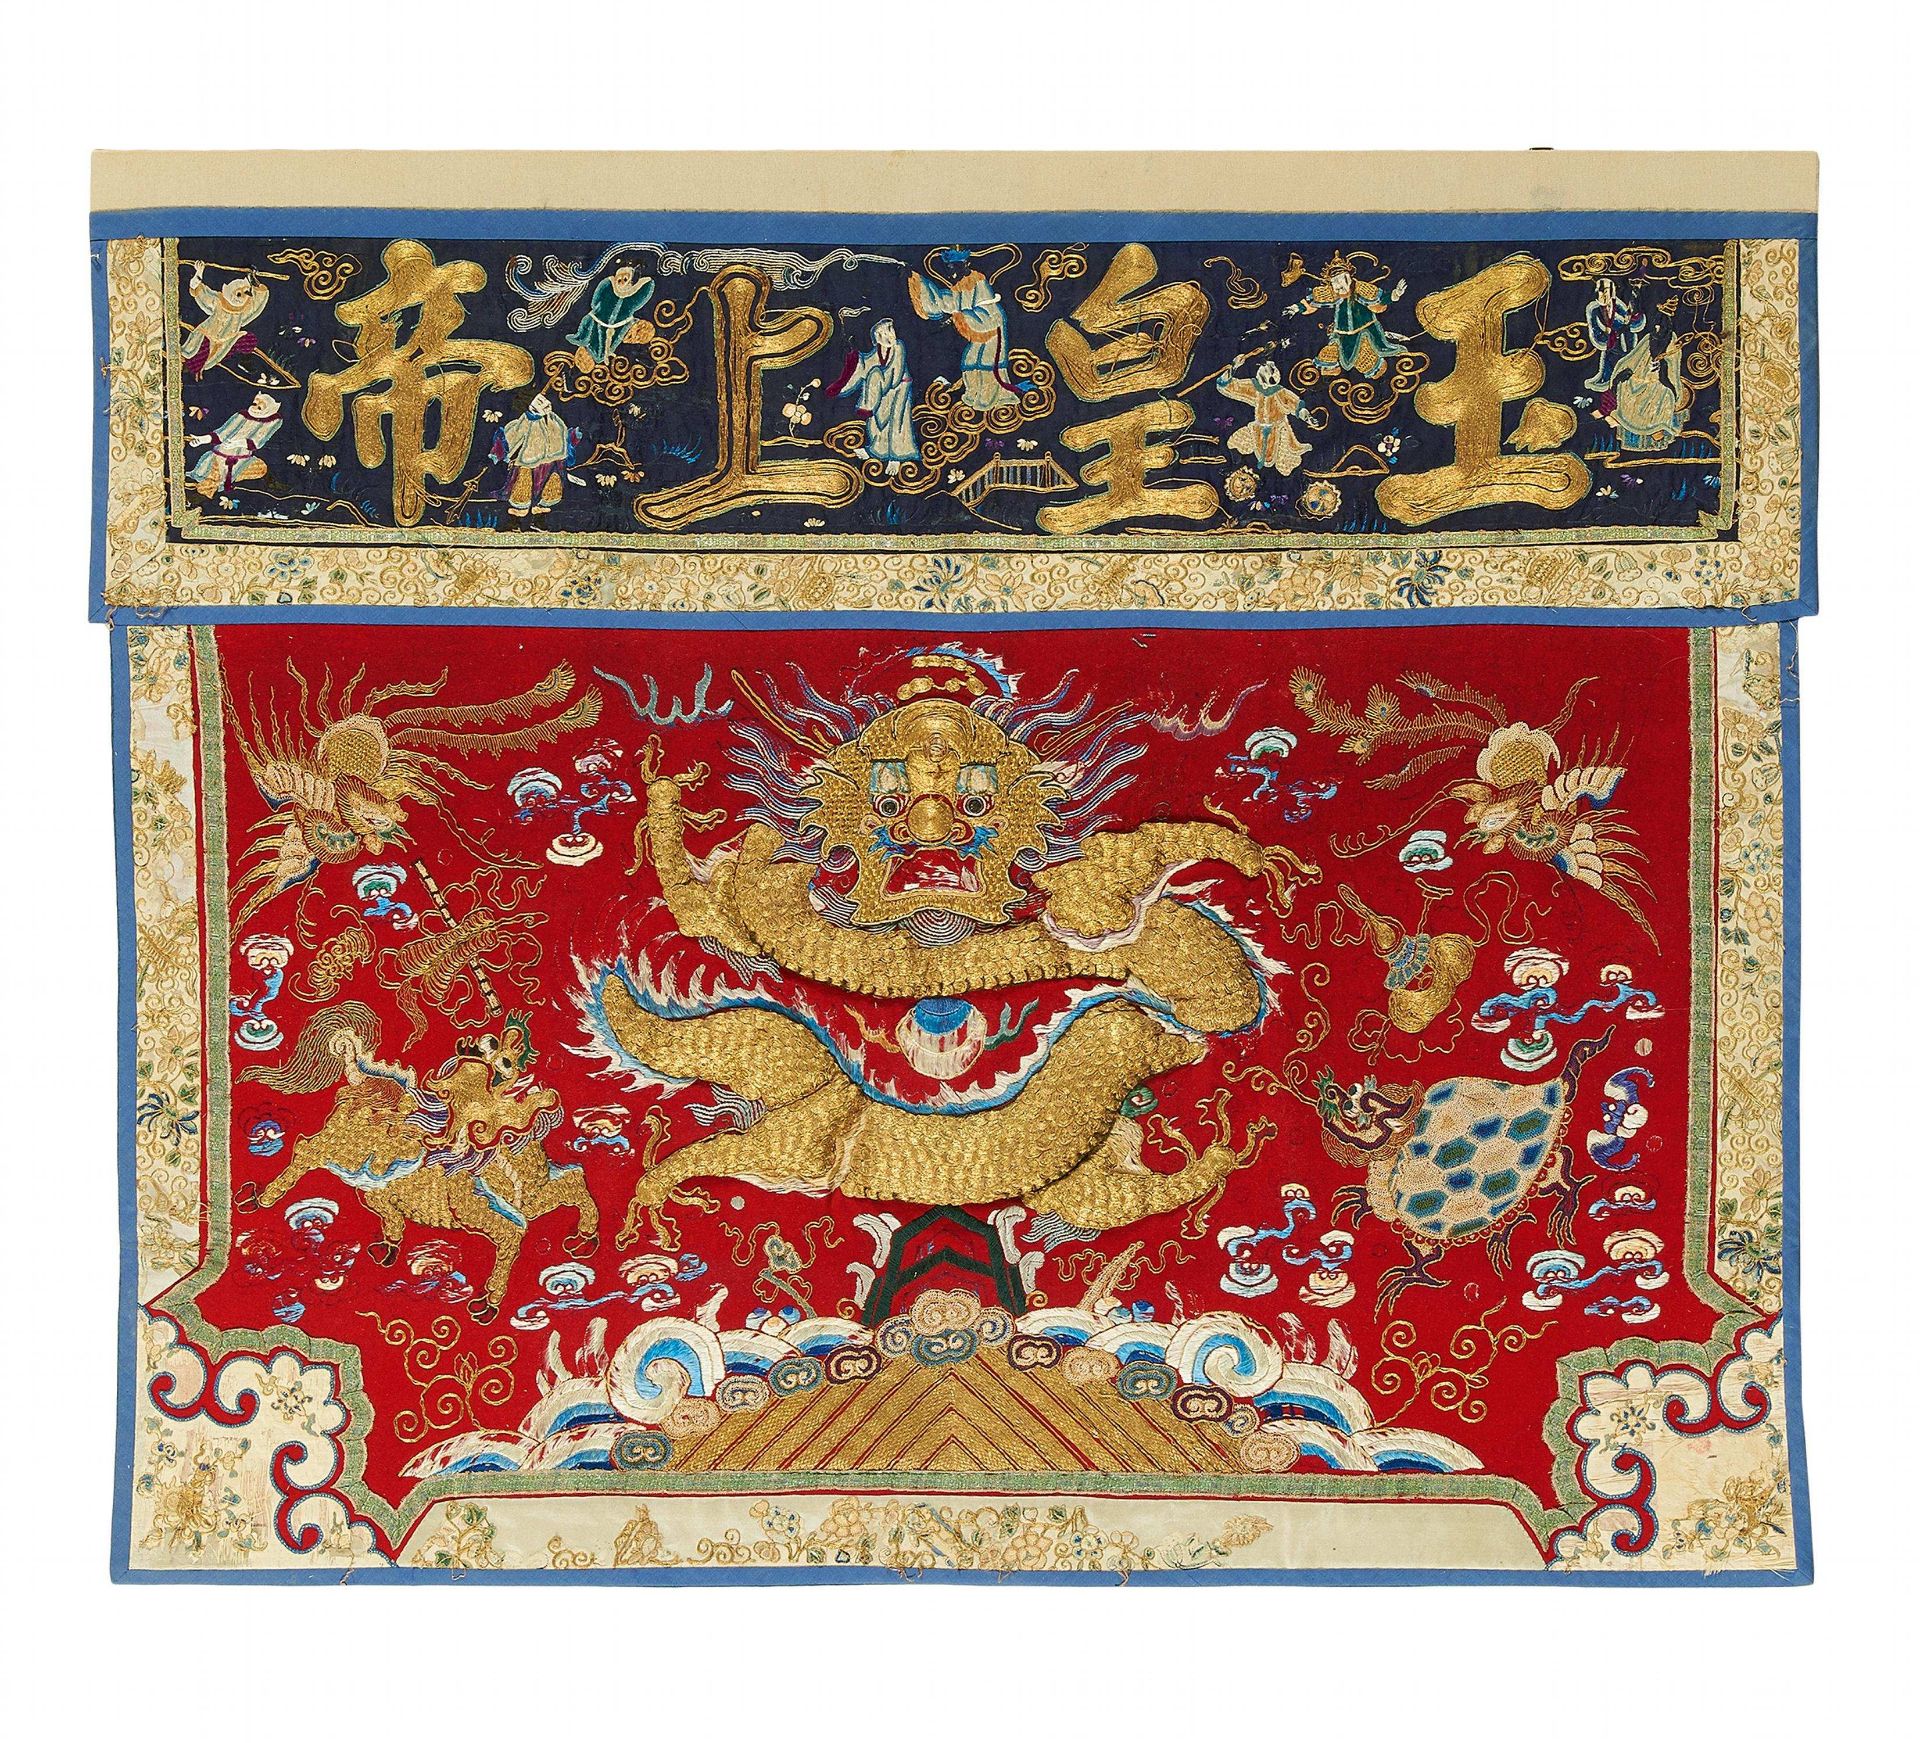 TABLE HANGING FOR DAOIST CEREMONIES. China. 18th/19th c. Silk and fulled wool fabric (import from